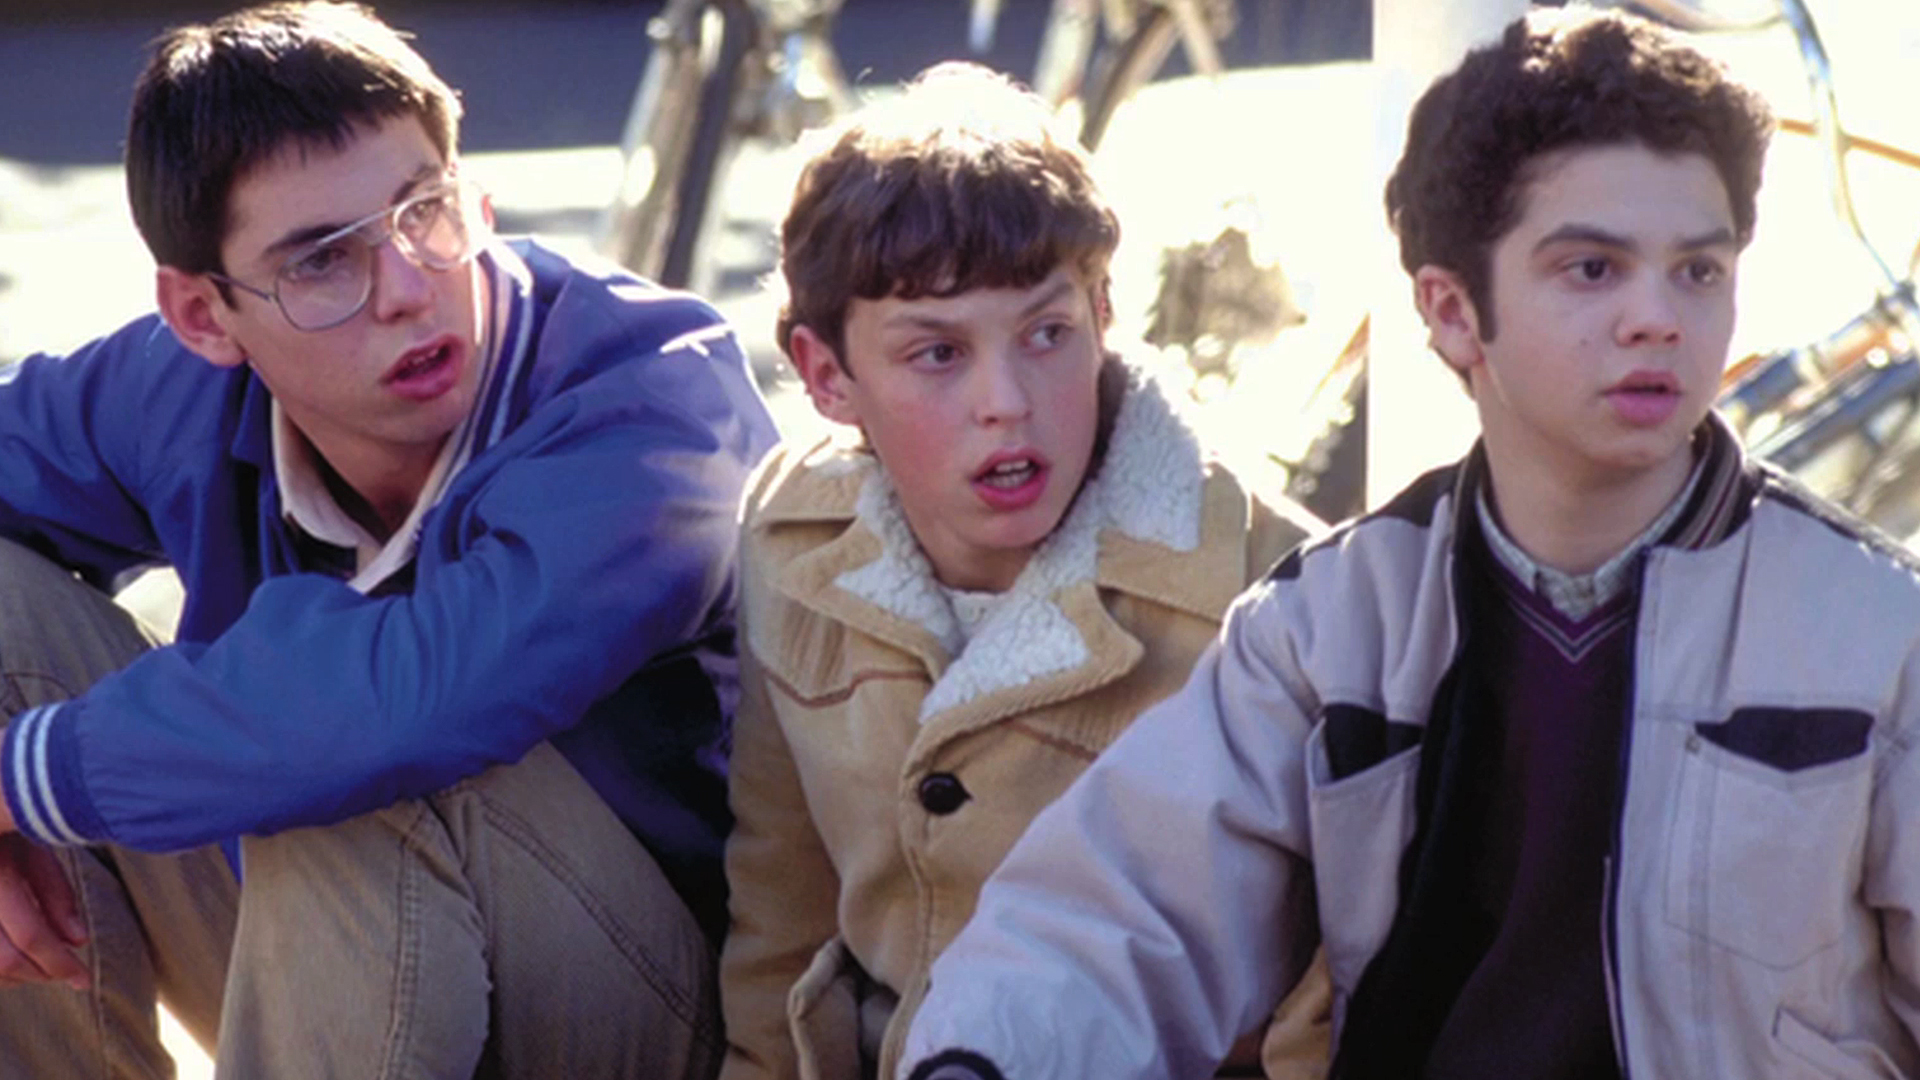 A young Martin Starr, John Francis Daley, and Samm Levine in Freaks and Geeks